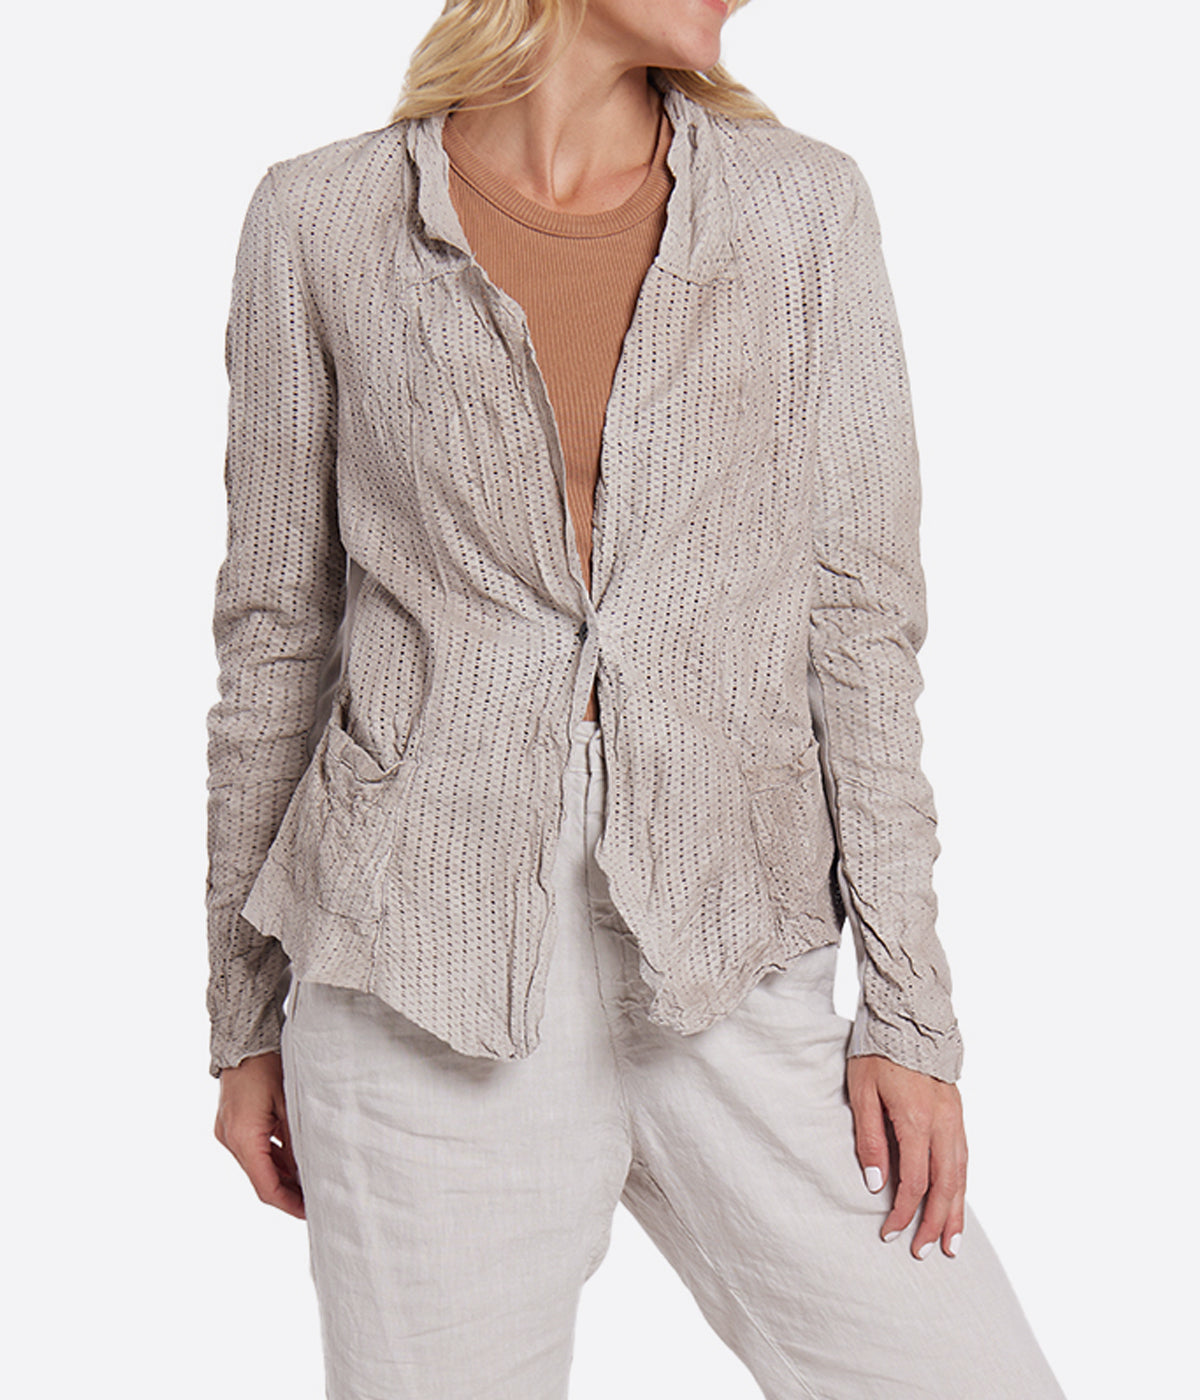 Image of a light weight textural leather beige jacket featuring two front pocket details and a button for closure. 